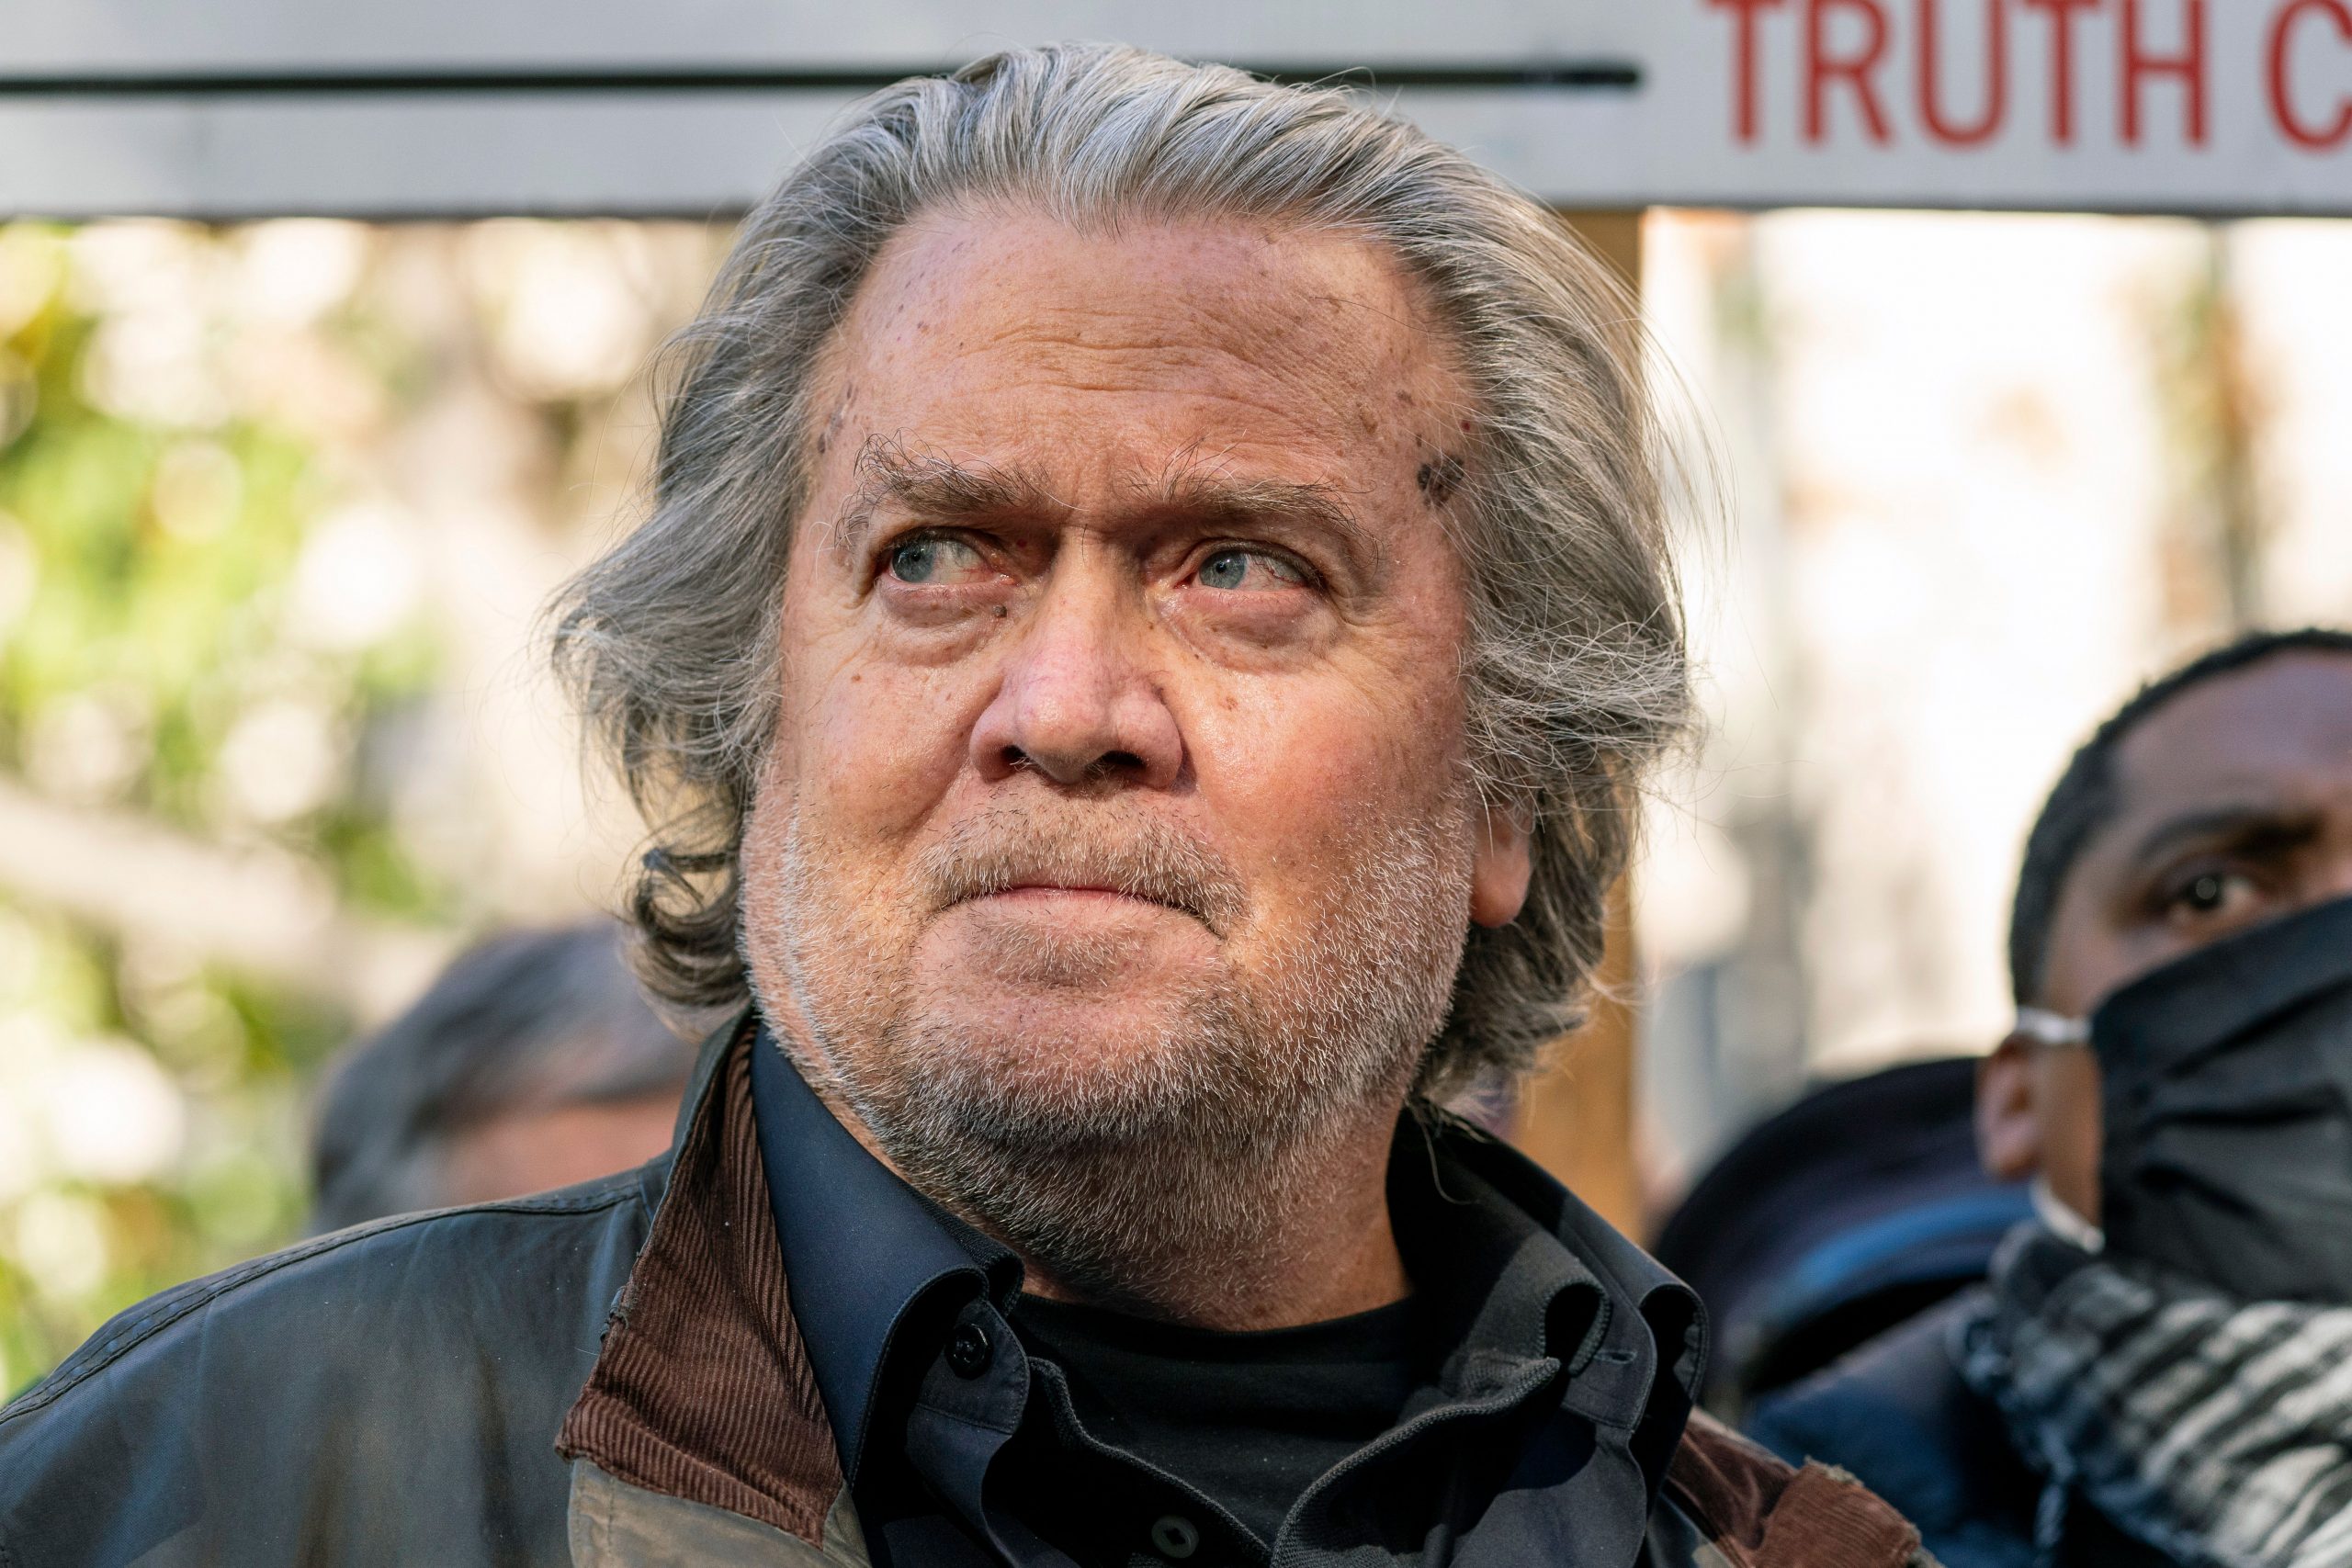 Jan 6 committee reschedules hearing, braces for Steve Bannon’s testimony